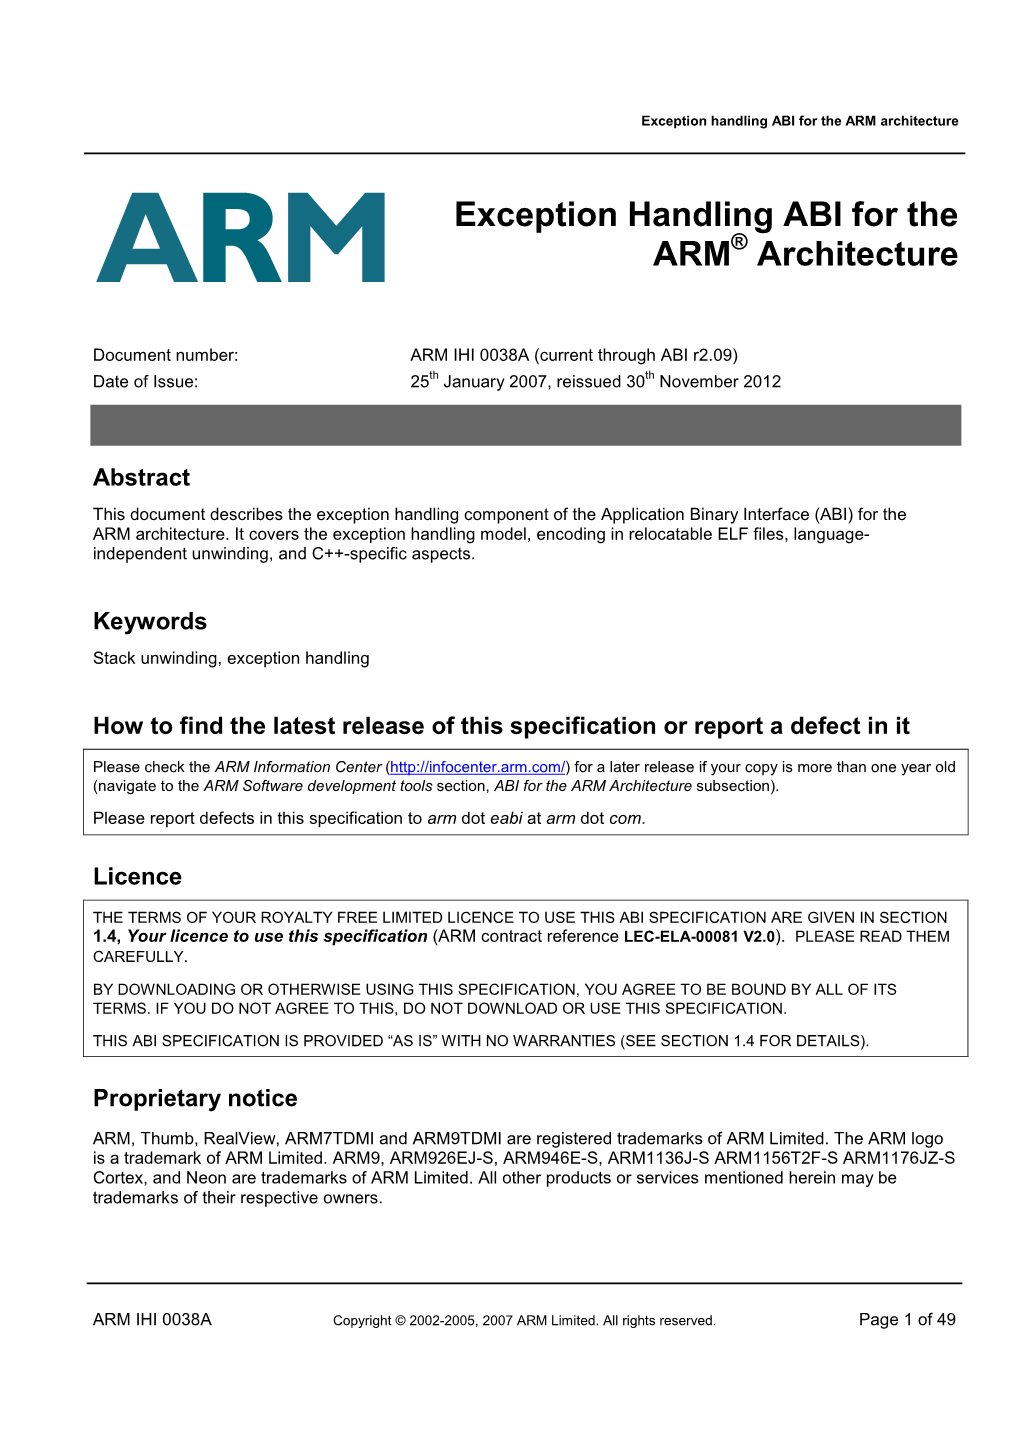 Exception Handling ABI for the ARM Architecture